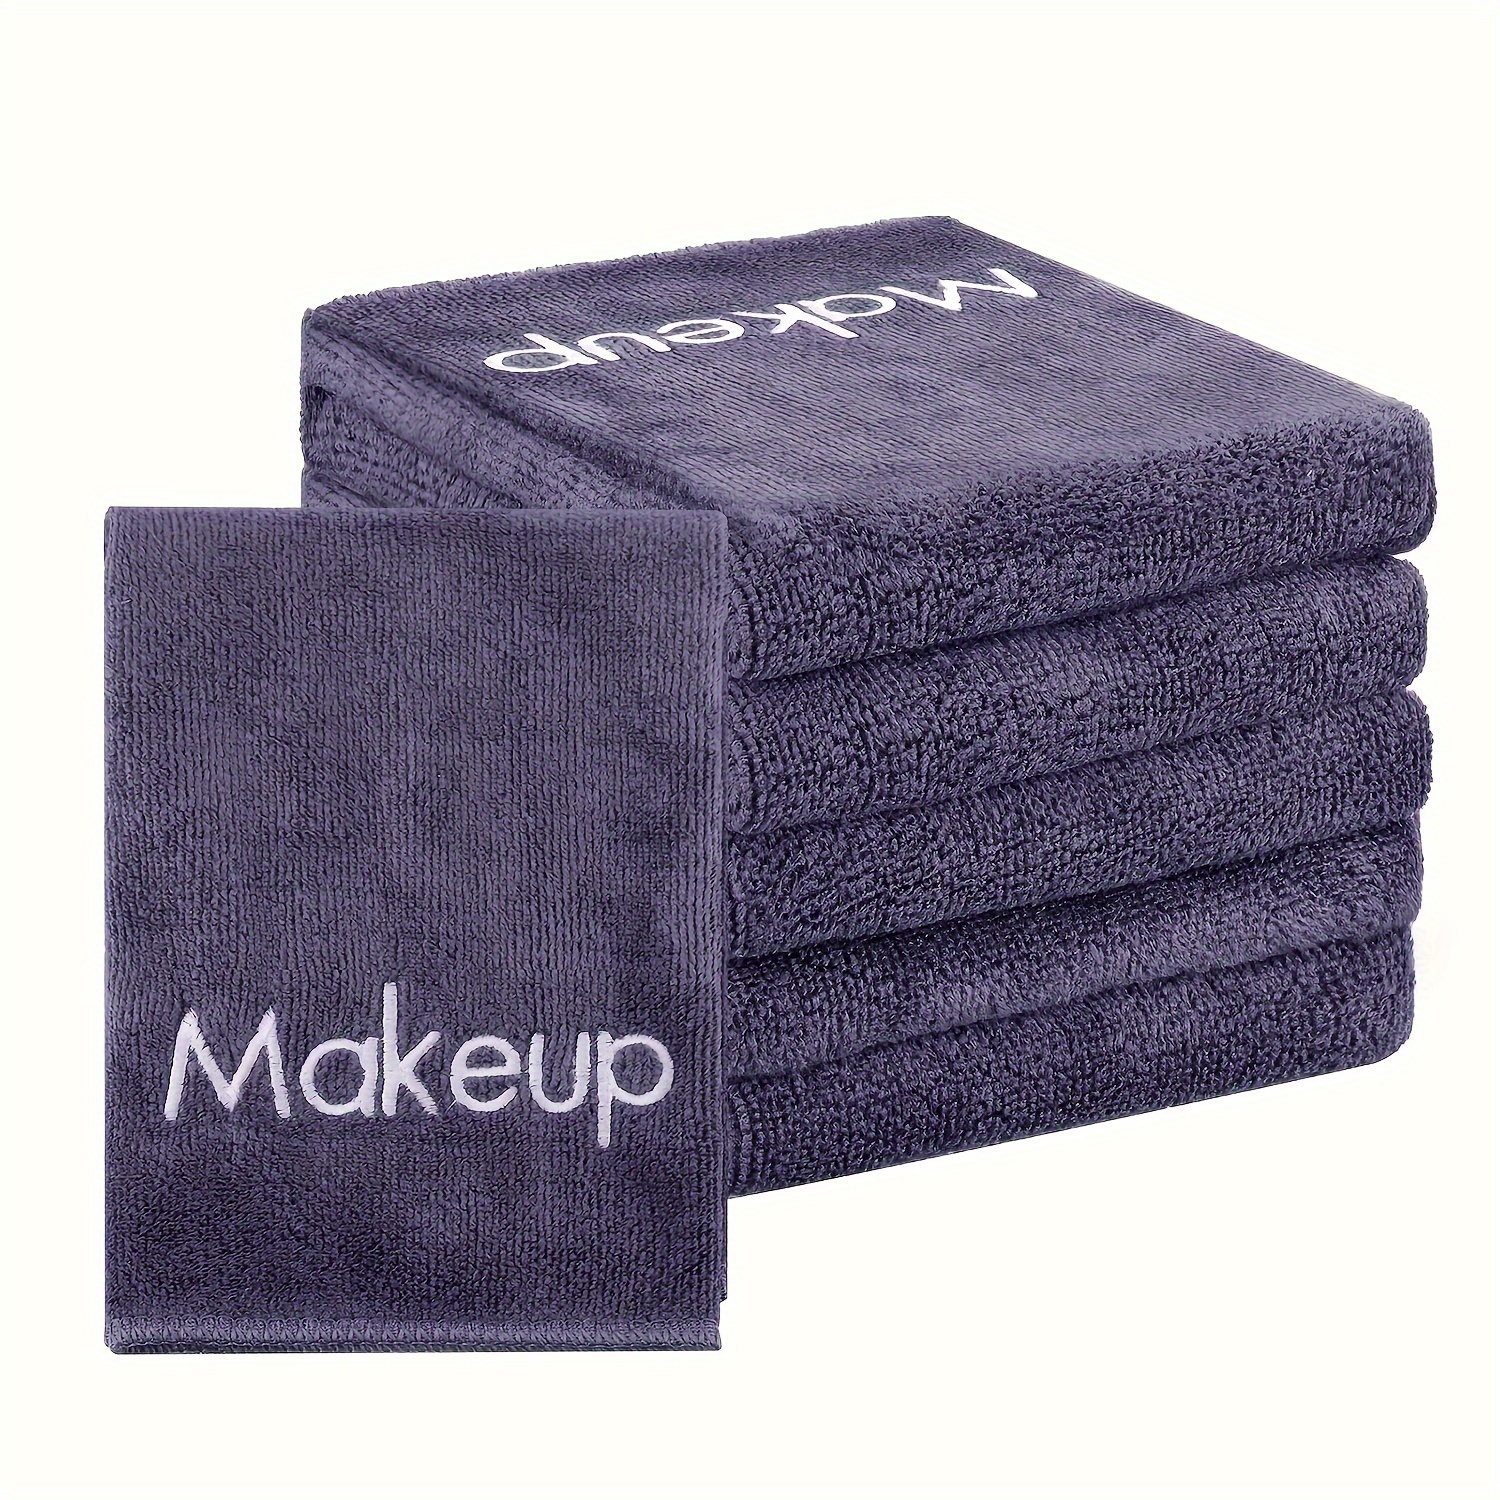 

6pcs Microfiber Makeup Towels, Reusable Soft Absorbent Facial Cloths With Embroidery For Women's Skin Care, Contemporary Style